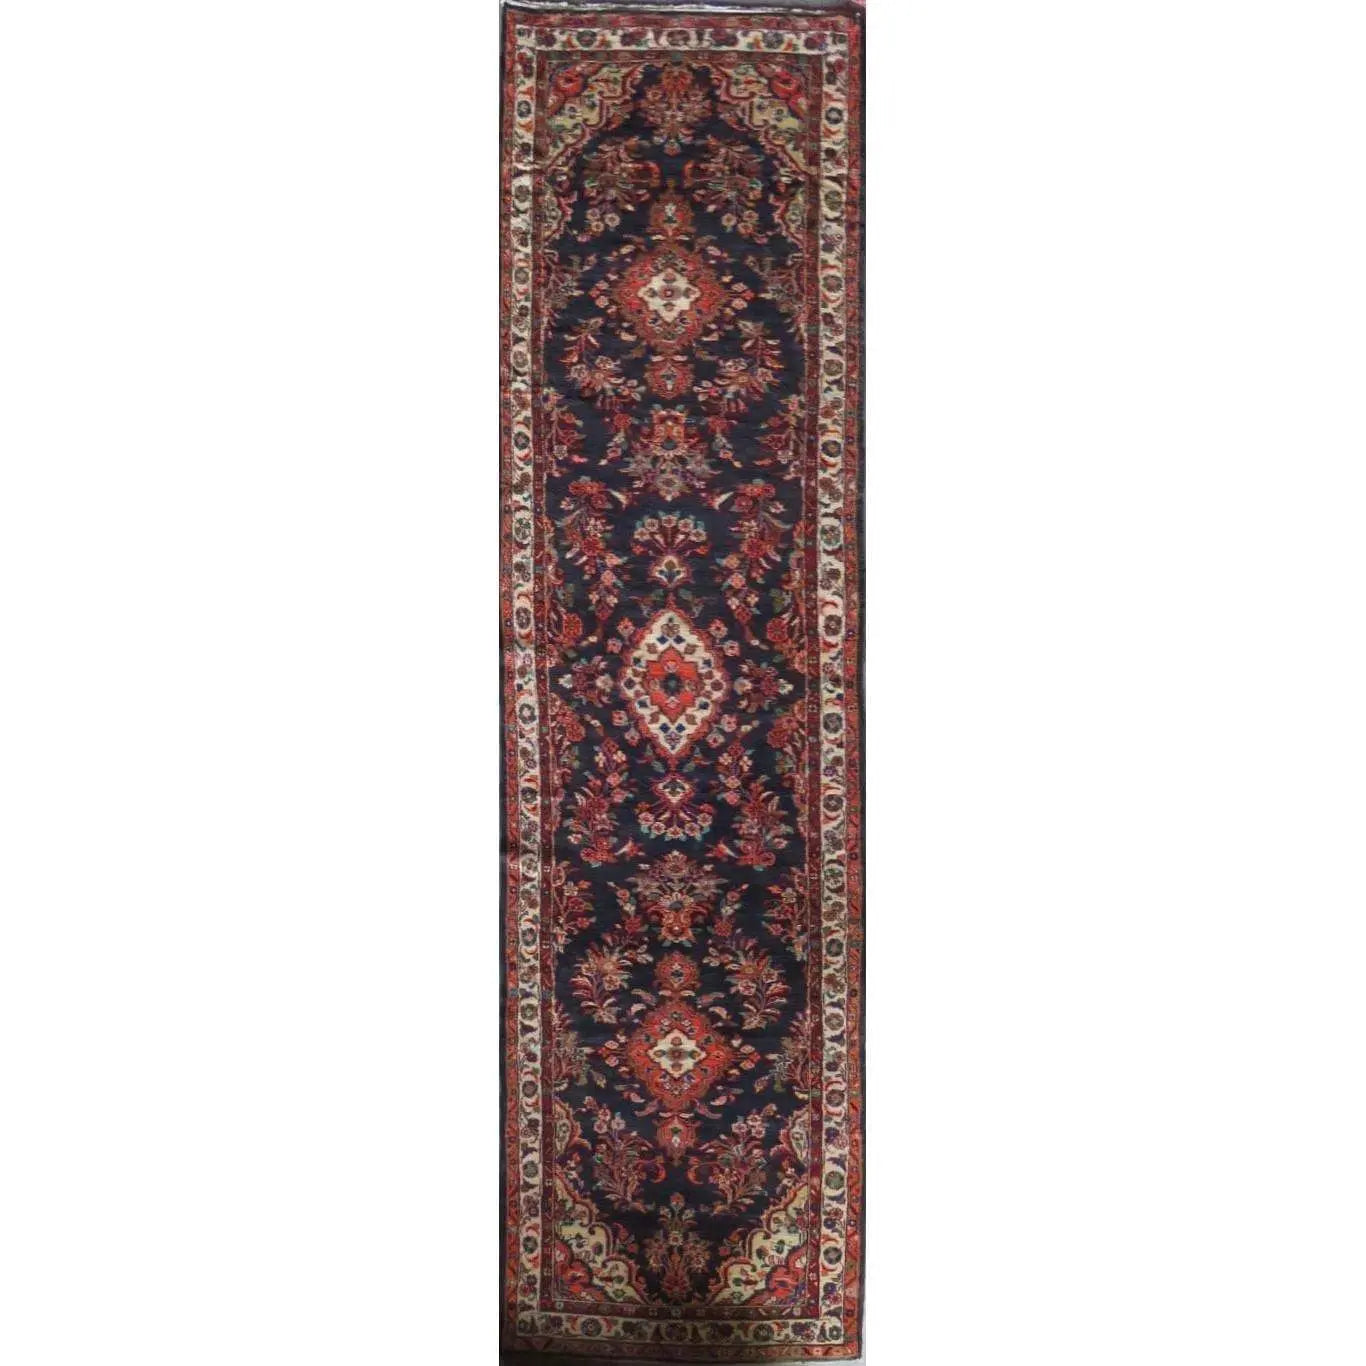 Hand-Knotted Persian Wool Rug _ Luxurious Vintage Design, 15'9" x 3'6", Artisan Crafted